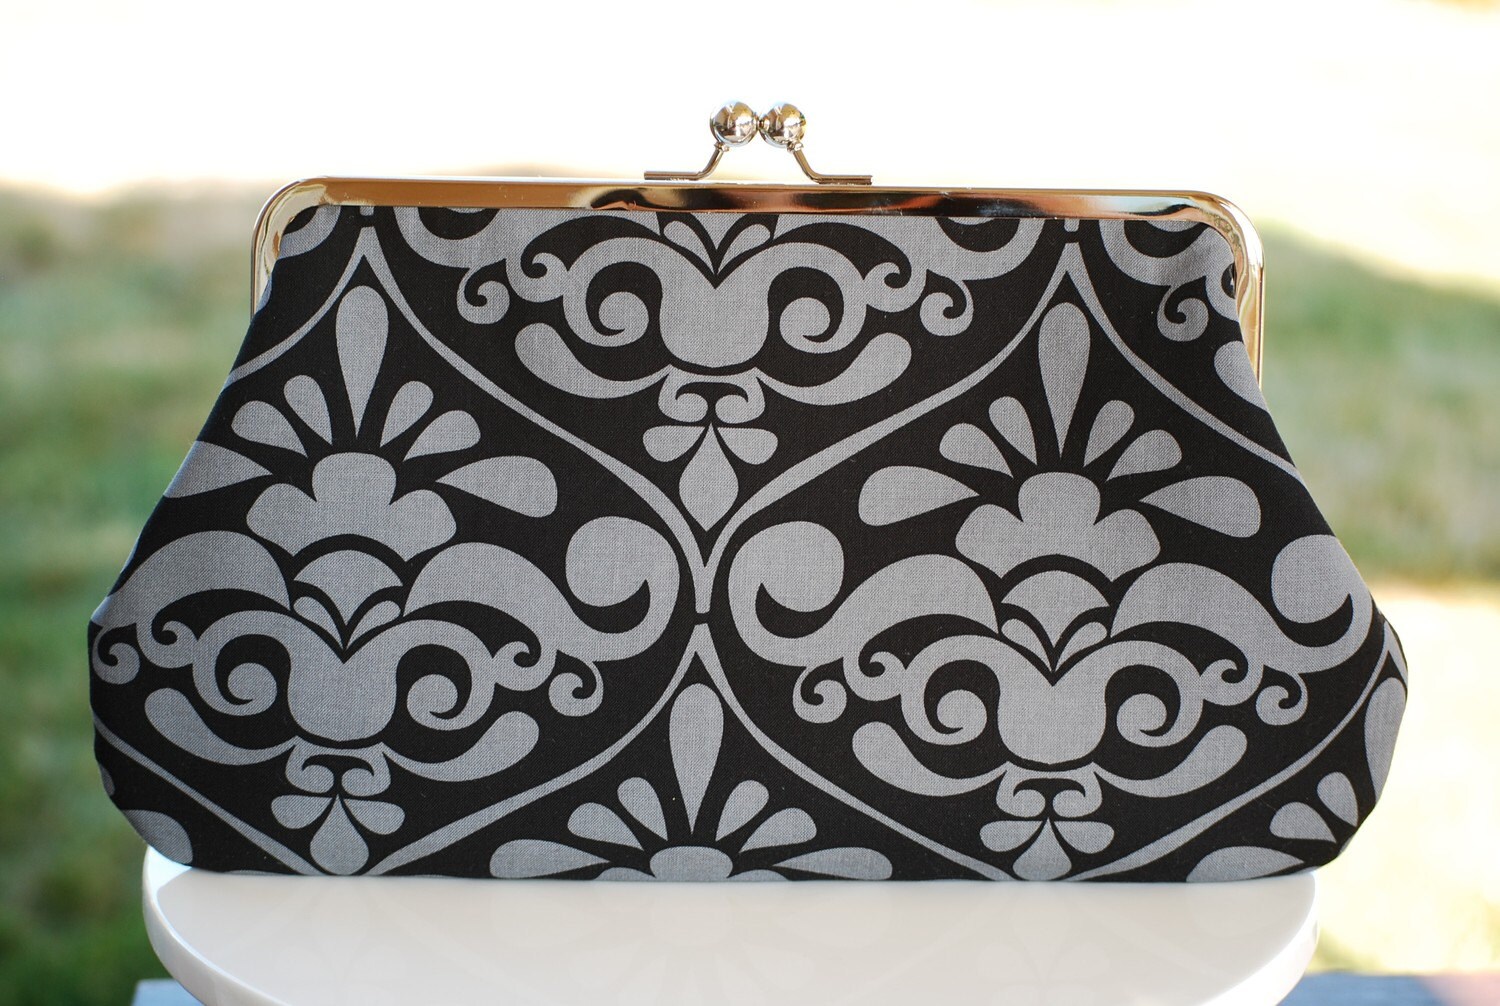 Beautiful Large Clutch and/or Diaper Clutch...Baby Diaper and Wipe Clutch Bag